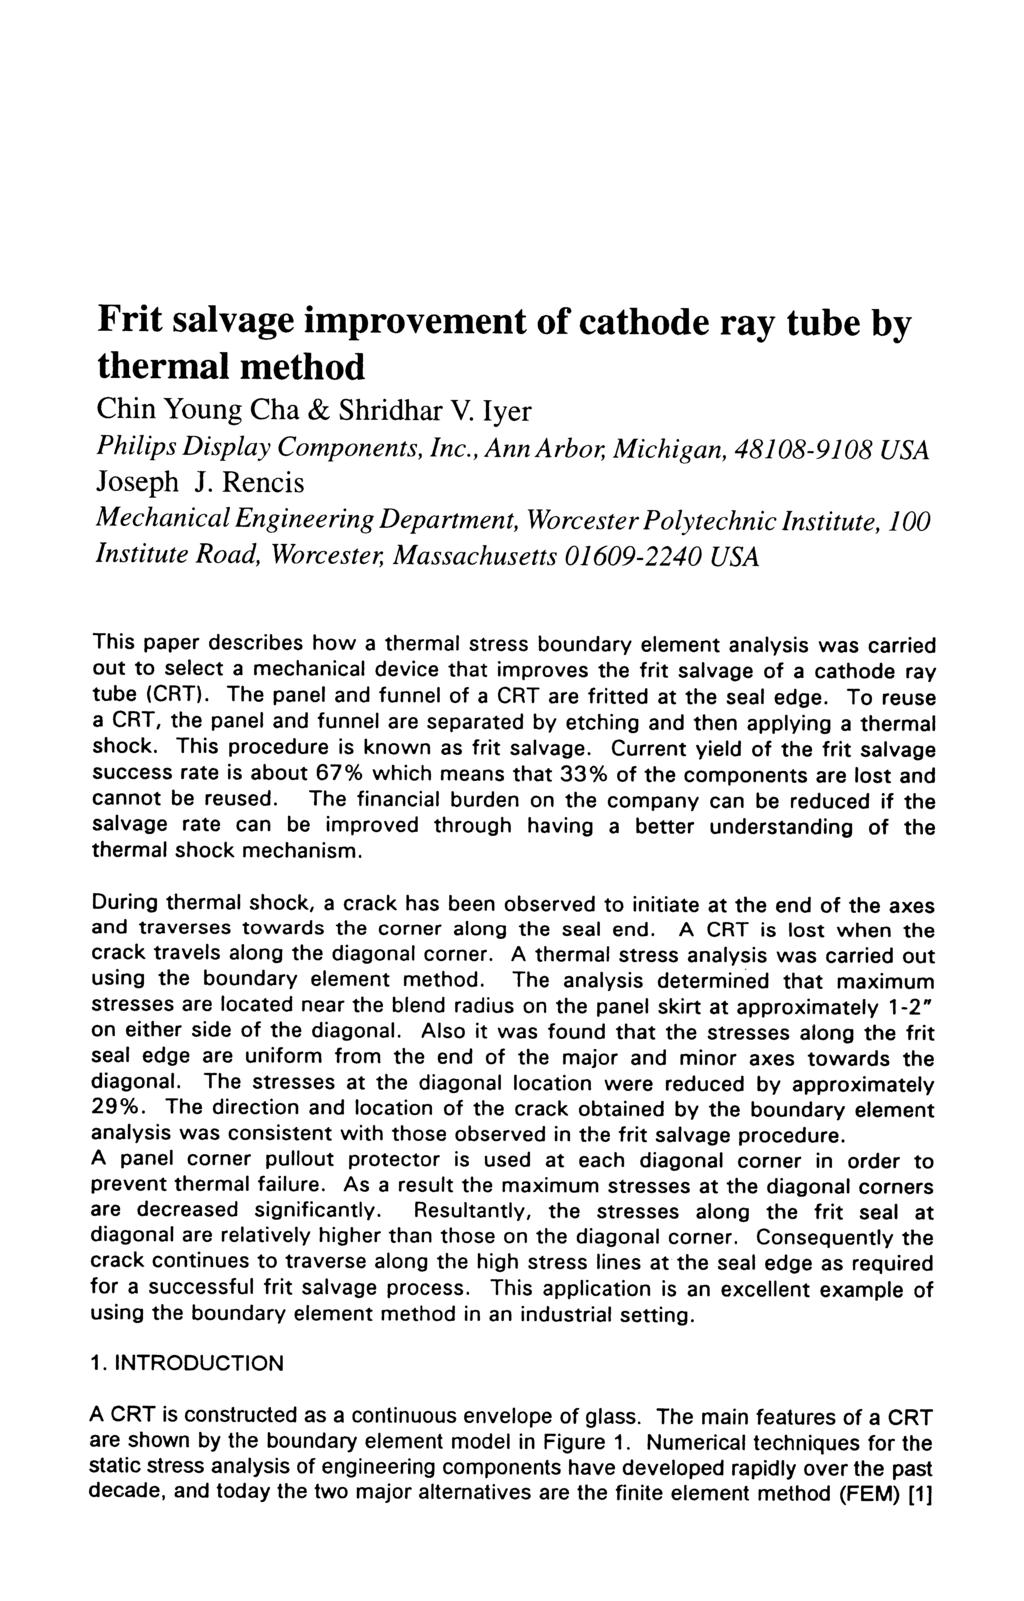 Frit salvage improvement of cathode ray tube by thermal method Chin Young Cha & Shridhar V. Iyer Philips Display Components, Inc., Ann Arbor, Michigan, 48108-9108 USA Joseph J.